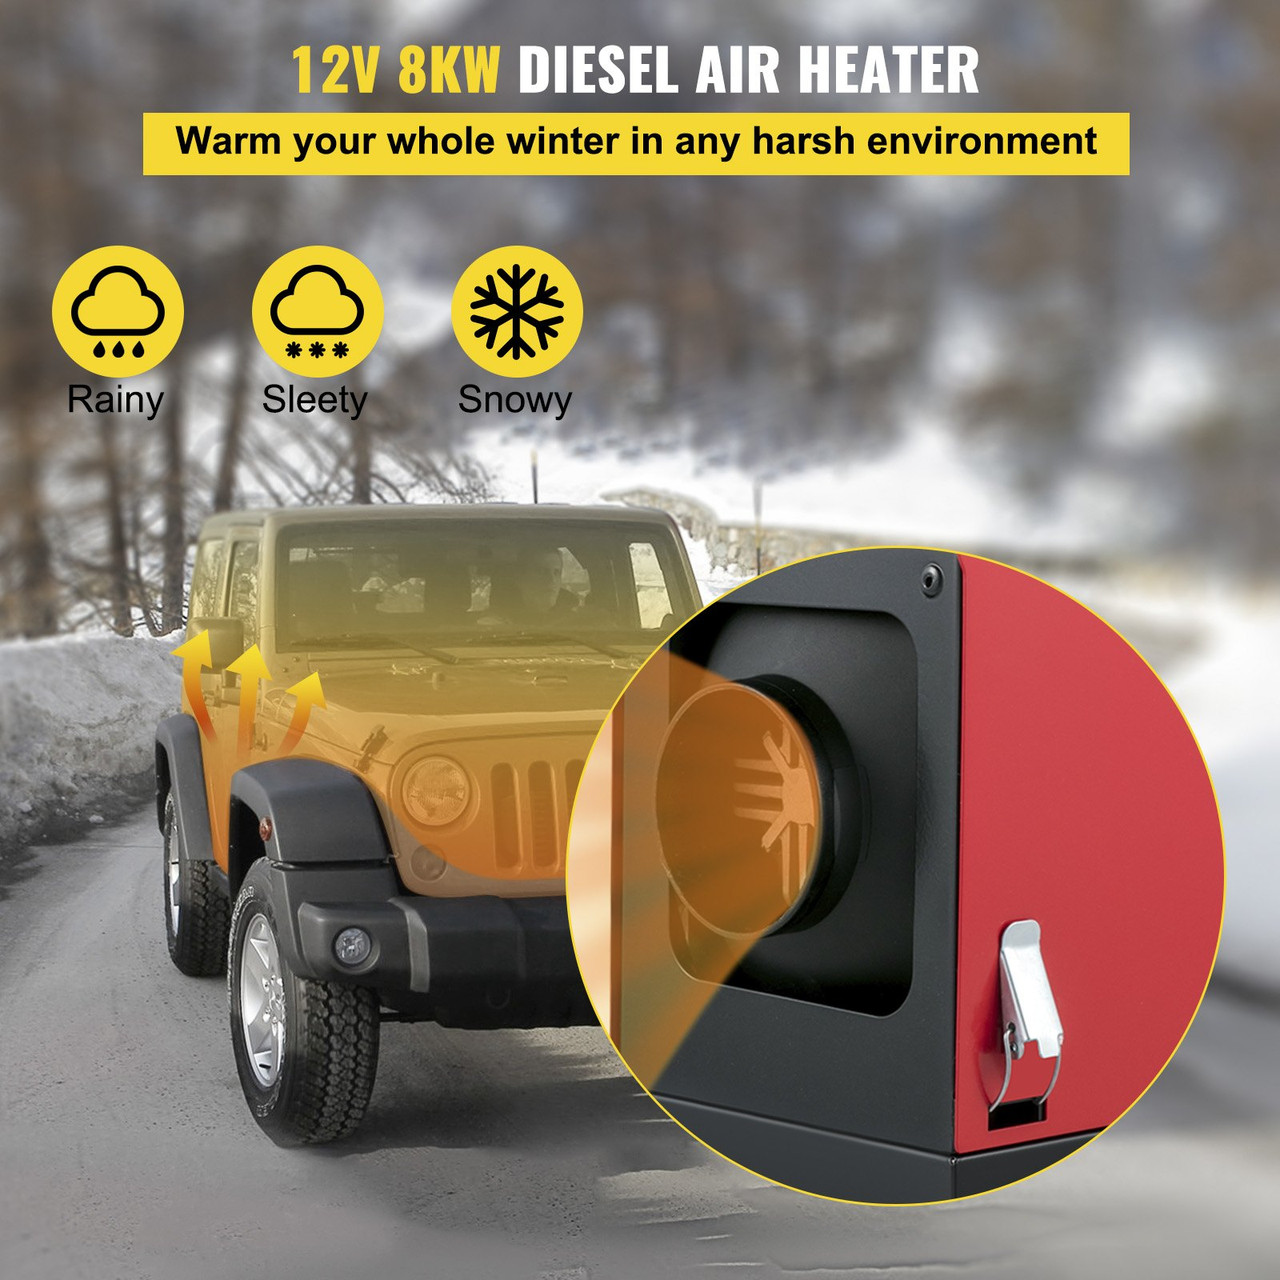 Diesel Air Heater All in One 12V 8KW Parking Heater For Car Trucks Boats Bus RVs